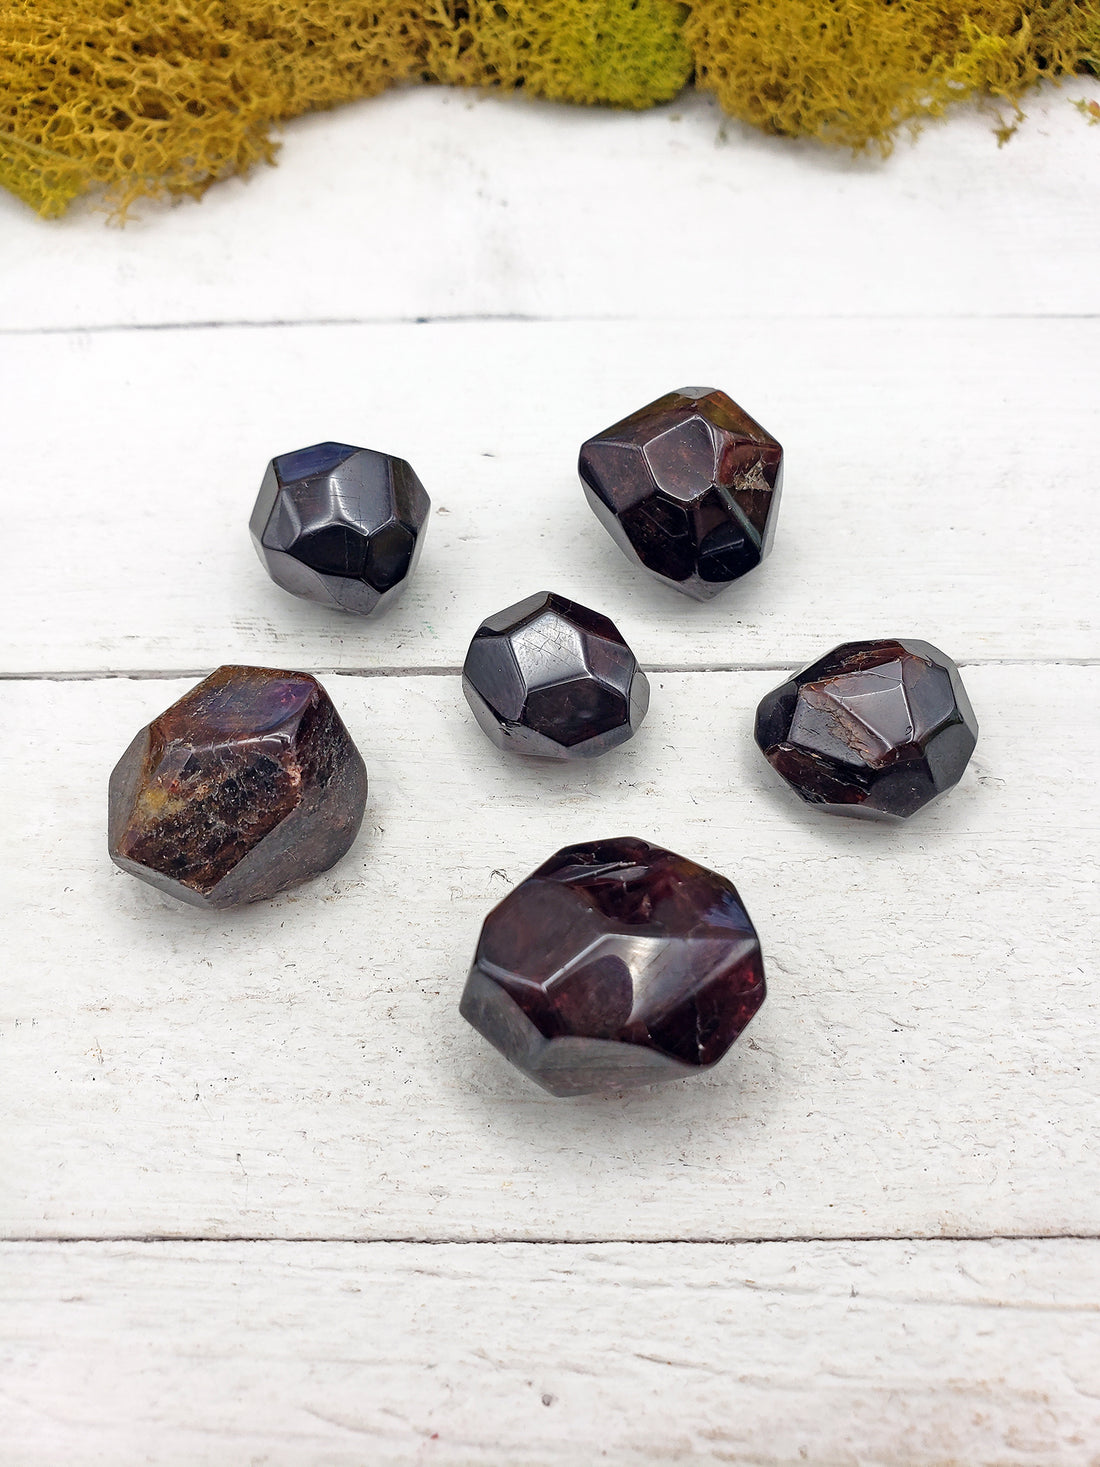 Garnet Stone Stock Photos and Pictures - 19,790 Images